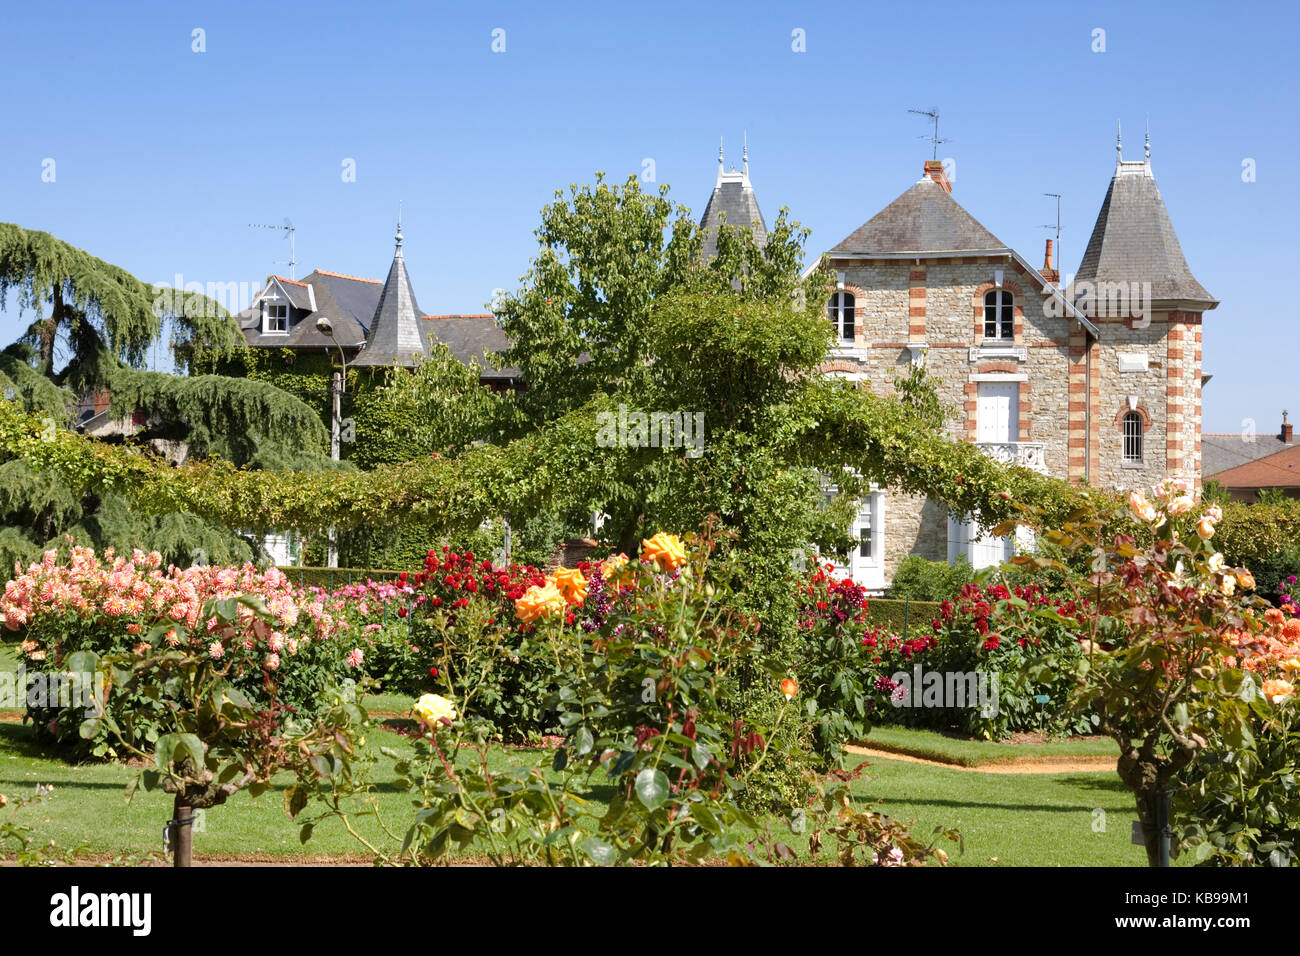 The rose gardens in theJardins du Thabor, Rennes, Brittany, France, with  beautiful slate-roofed houses in the Boulevard de la Duchesse Anne beyond  Stock Photo - Alamy